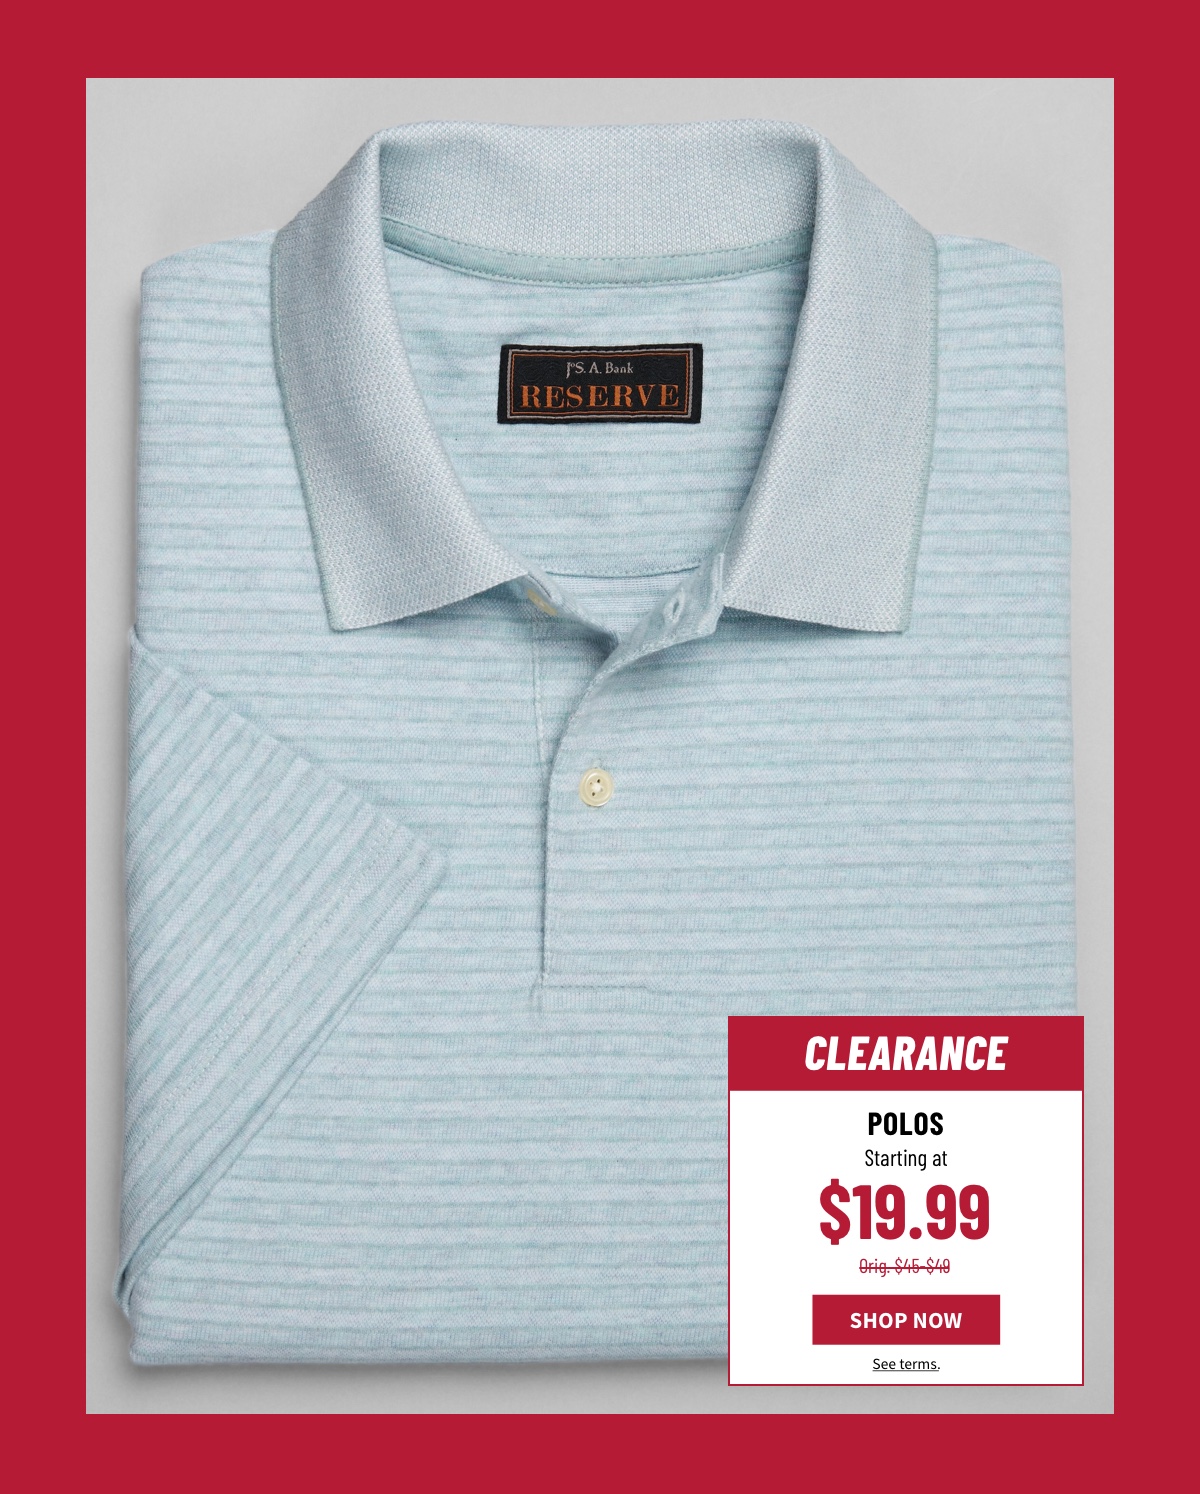 Clearance Polos Starting at $19.99